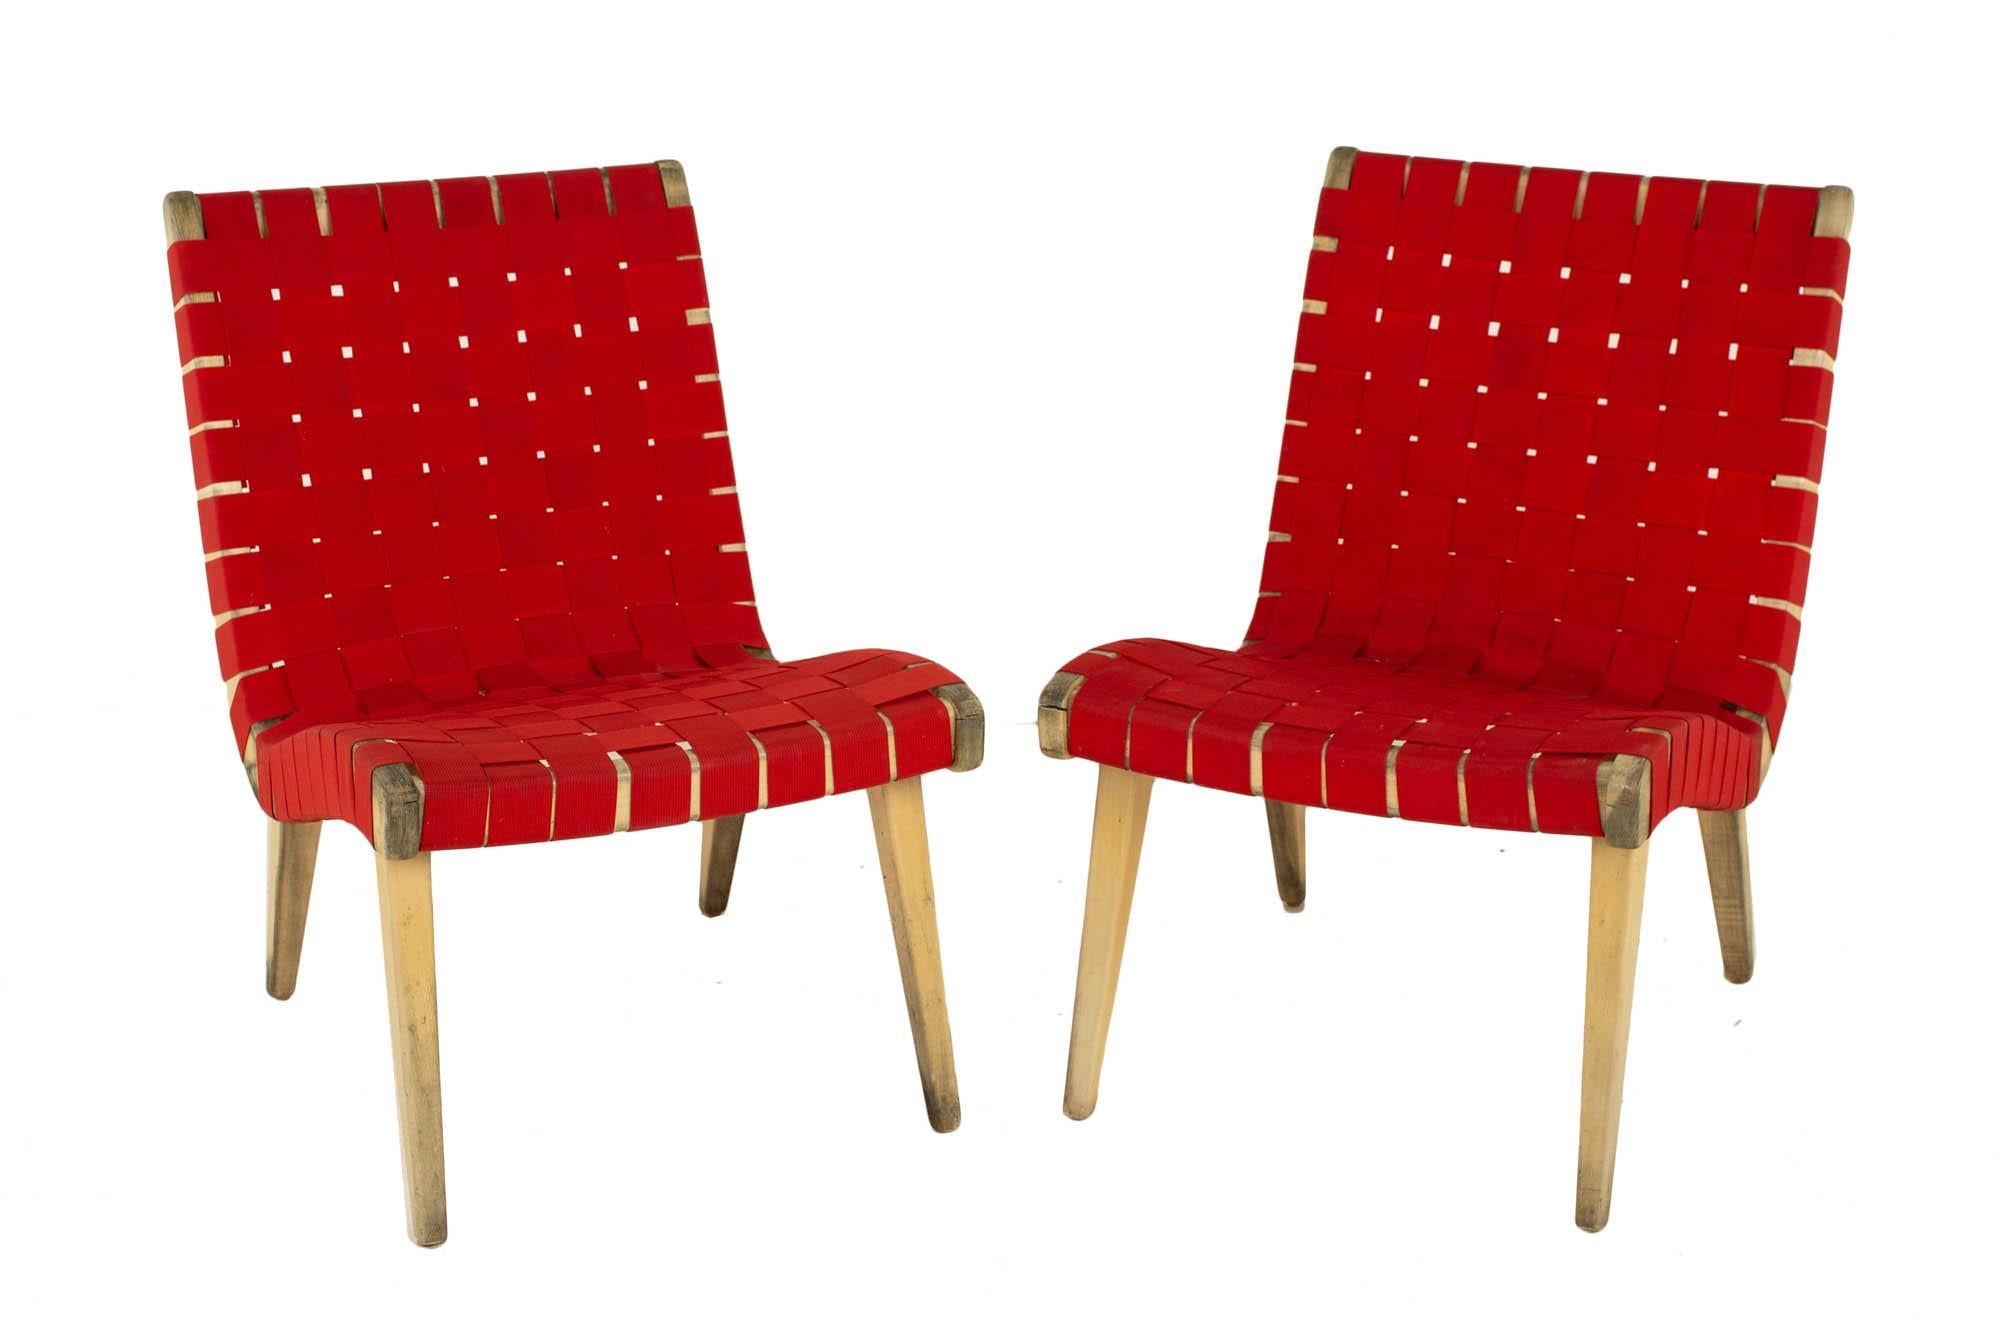 Jens Risom for Knoll mid century strap lounge chairs - pair

These chairs measure: 20 wide x 23 deep x 30 inches high, with a seat height of 15.5 inches

?All pieces of furniture can be had in what we call restored vintage condition. That means